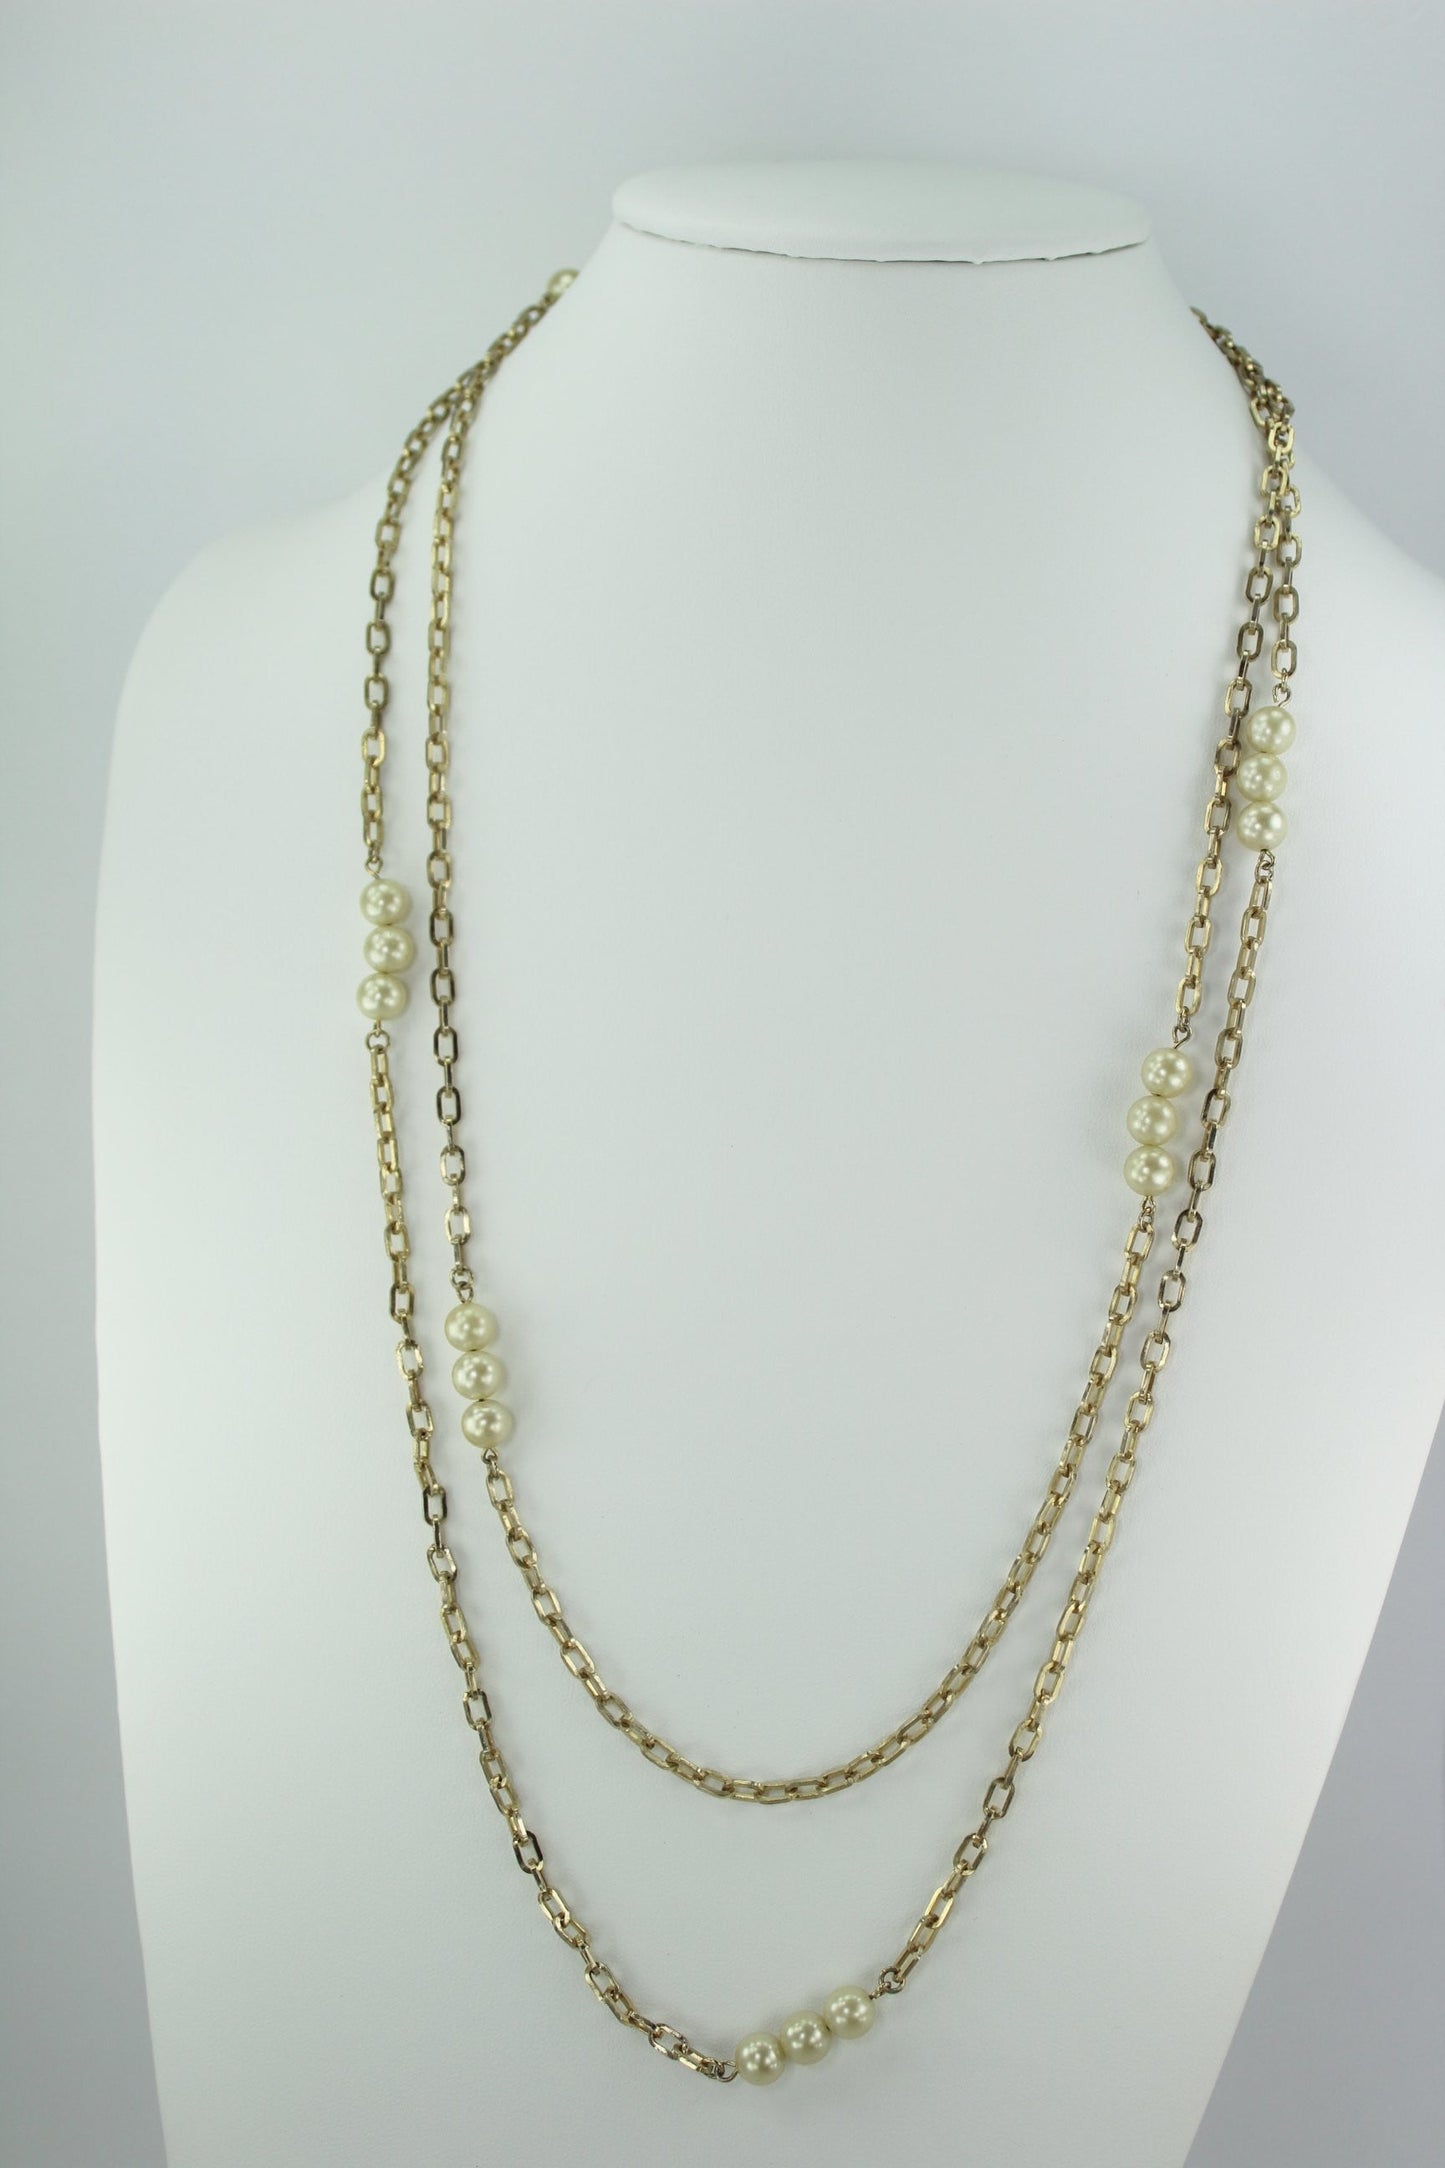 Vintage ALICE Caviness Necklace Long 29" Chain Triple Pearls Opera Length collectible